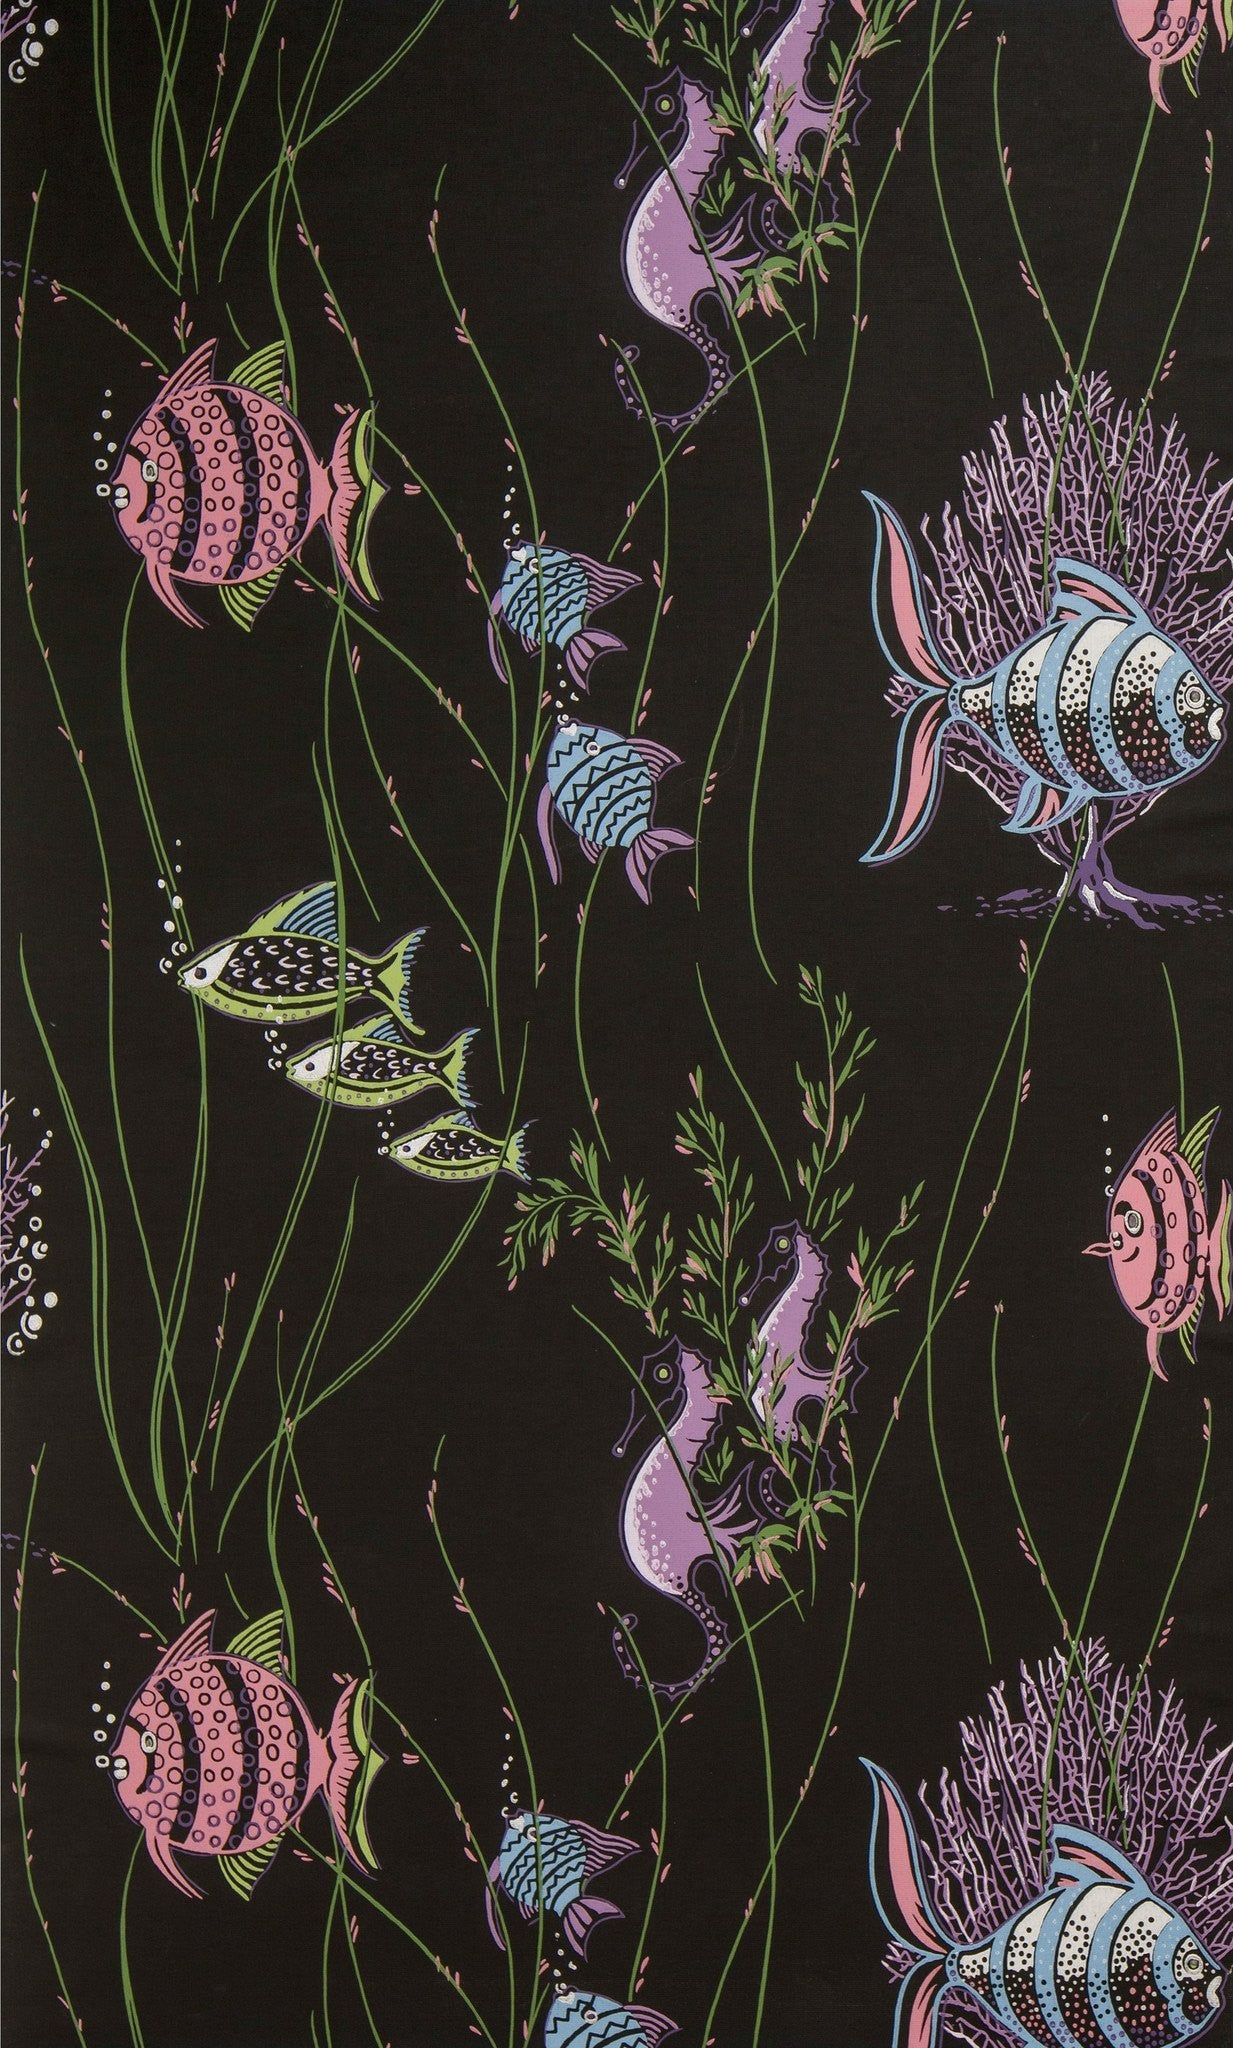 Aquatic Scene With Fish And Seaweed Vintage Wallpaper & Company